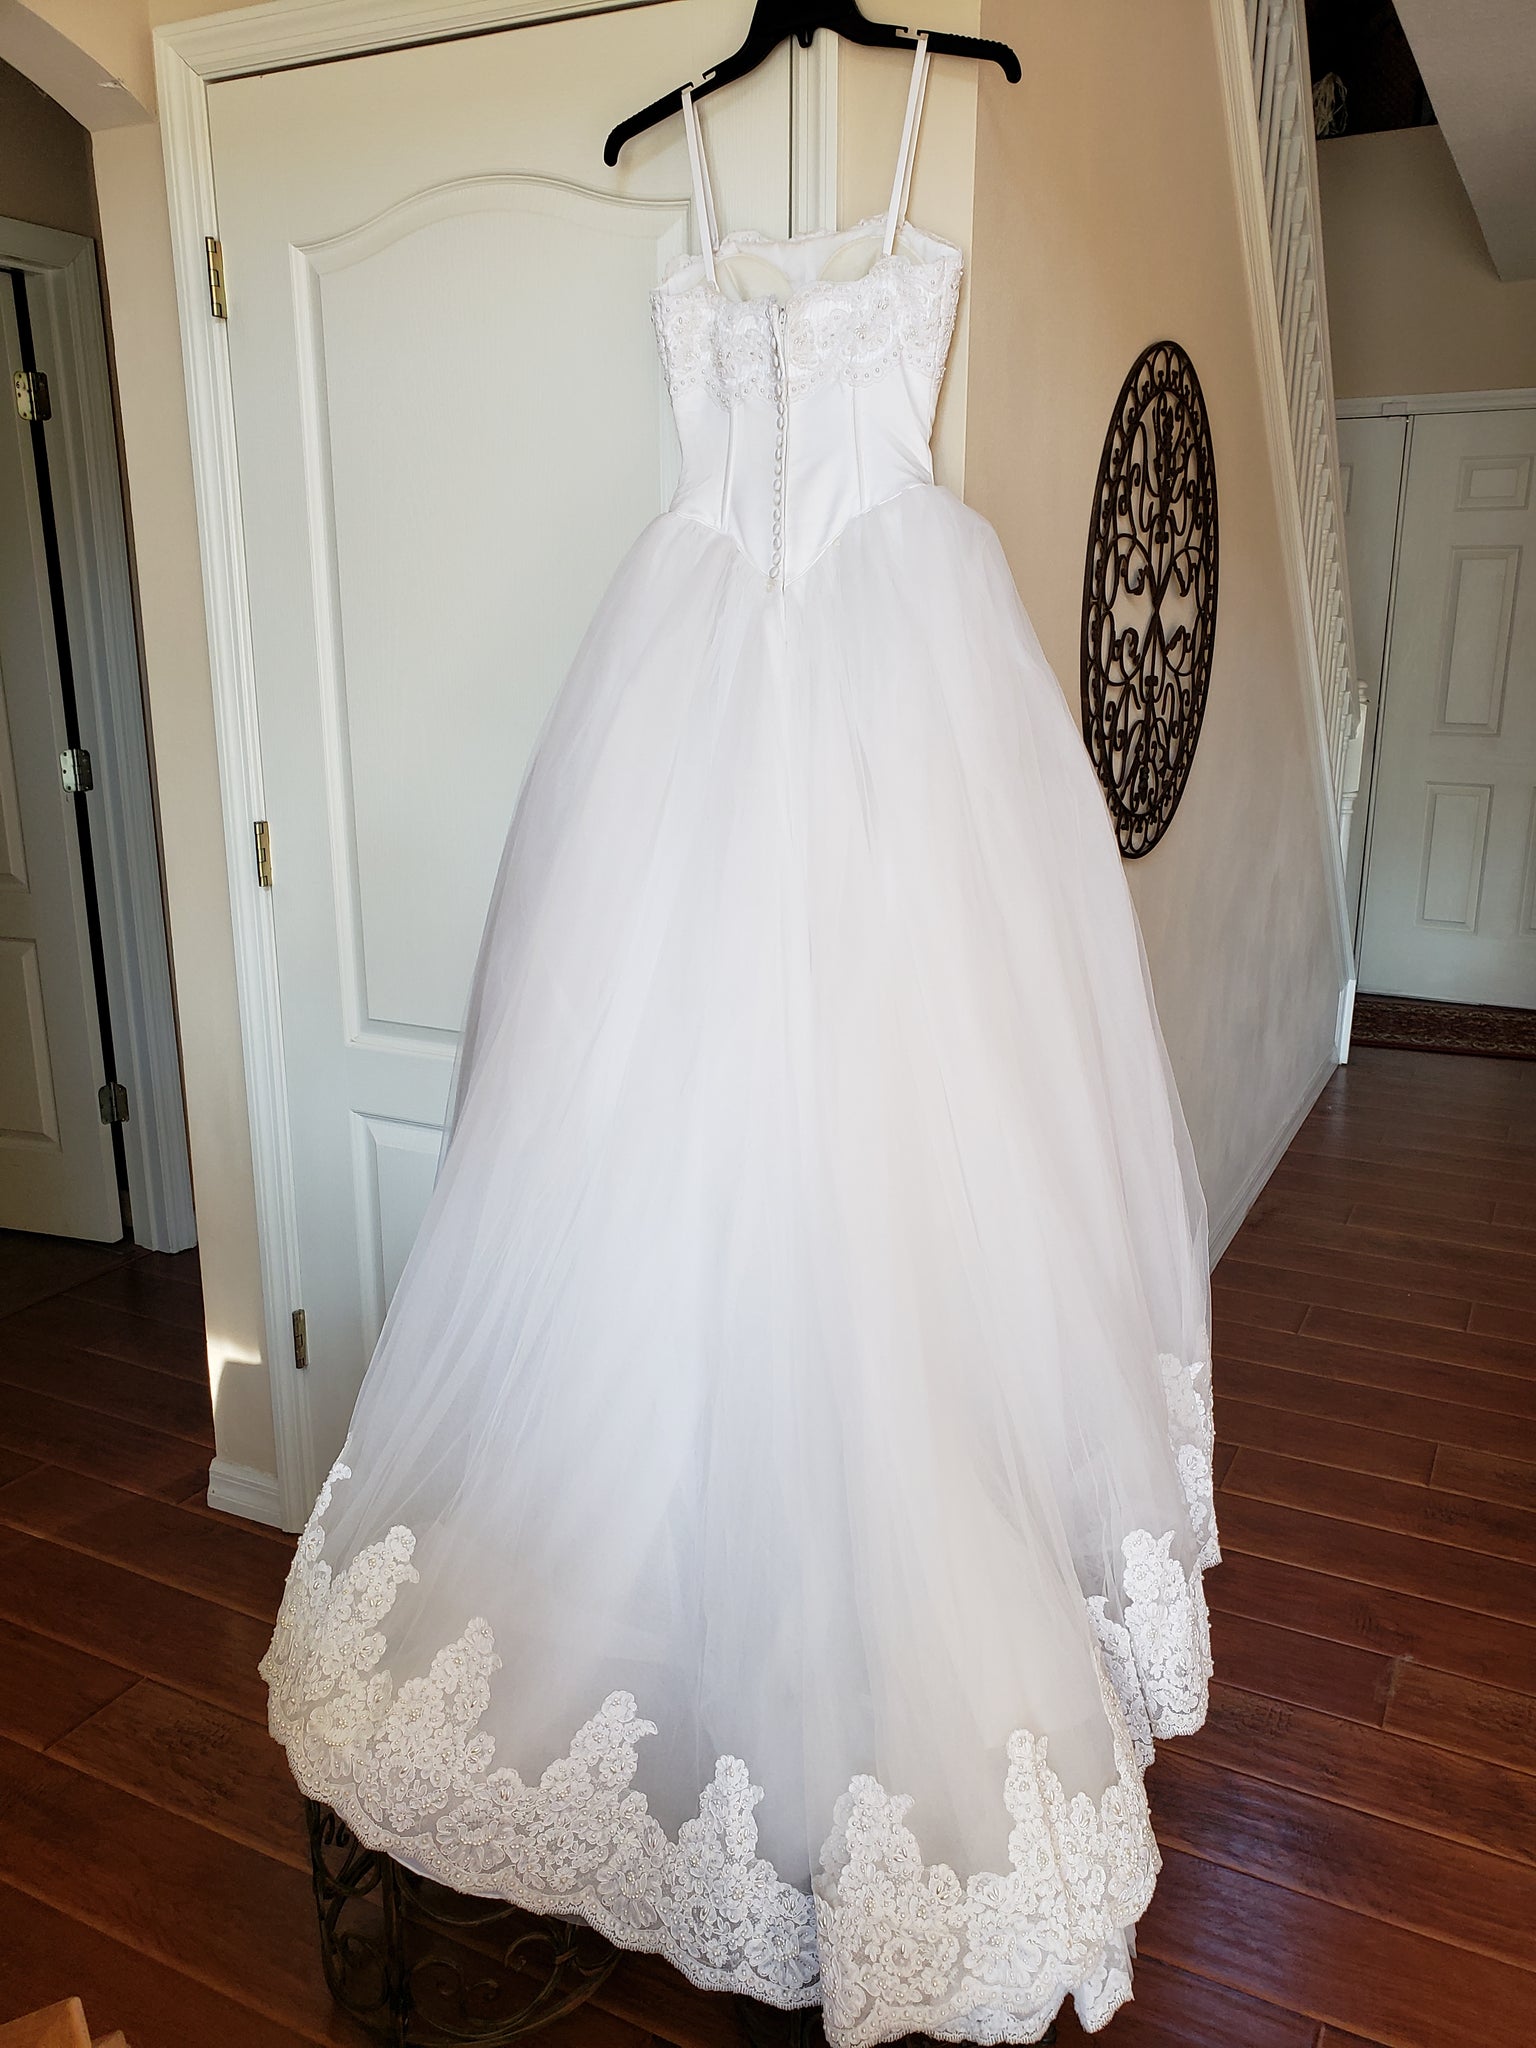 Alfred Angelo 'Corset Tulle' size 2 used wedding dress – Nearly Newlywed